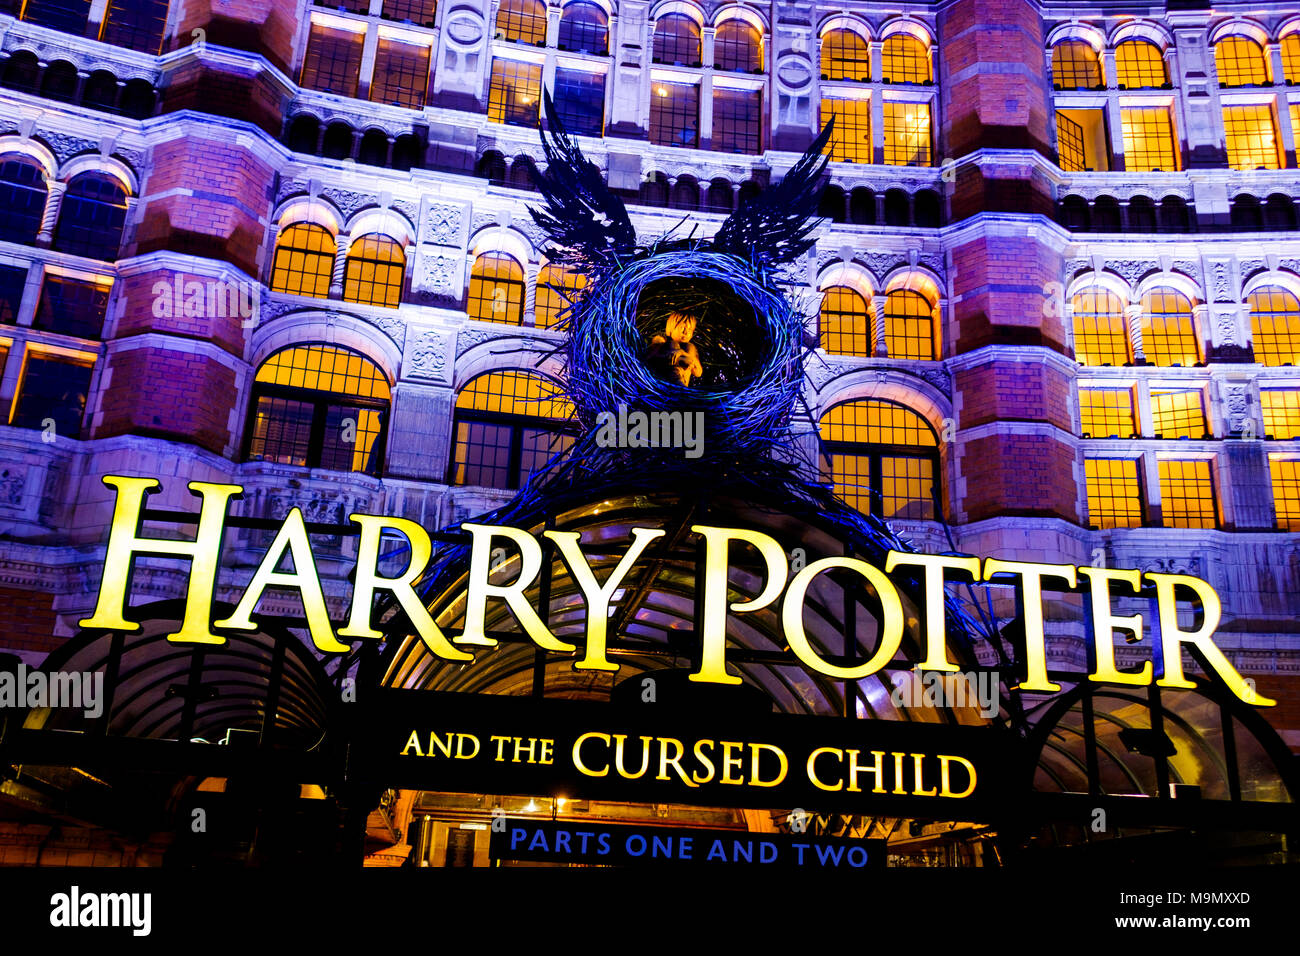 Illuminated facade of the Palace Theatre with advertising for Harry Potter play, West End, London, Great Britain Stock Photo